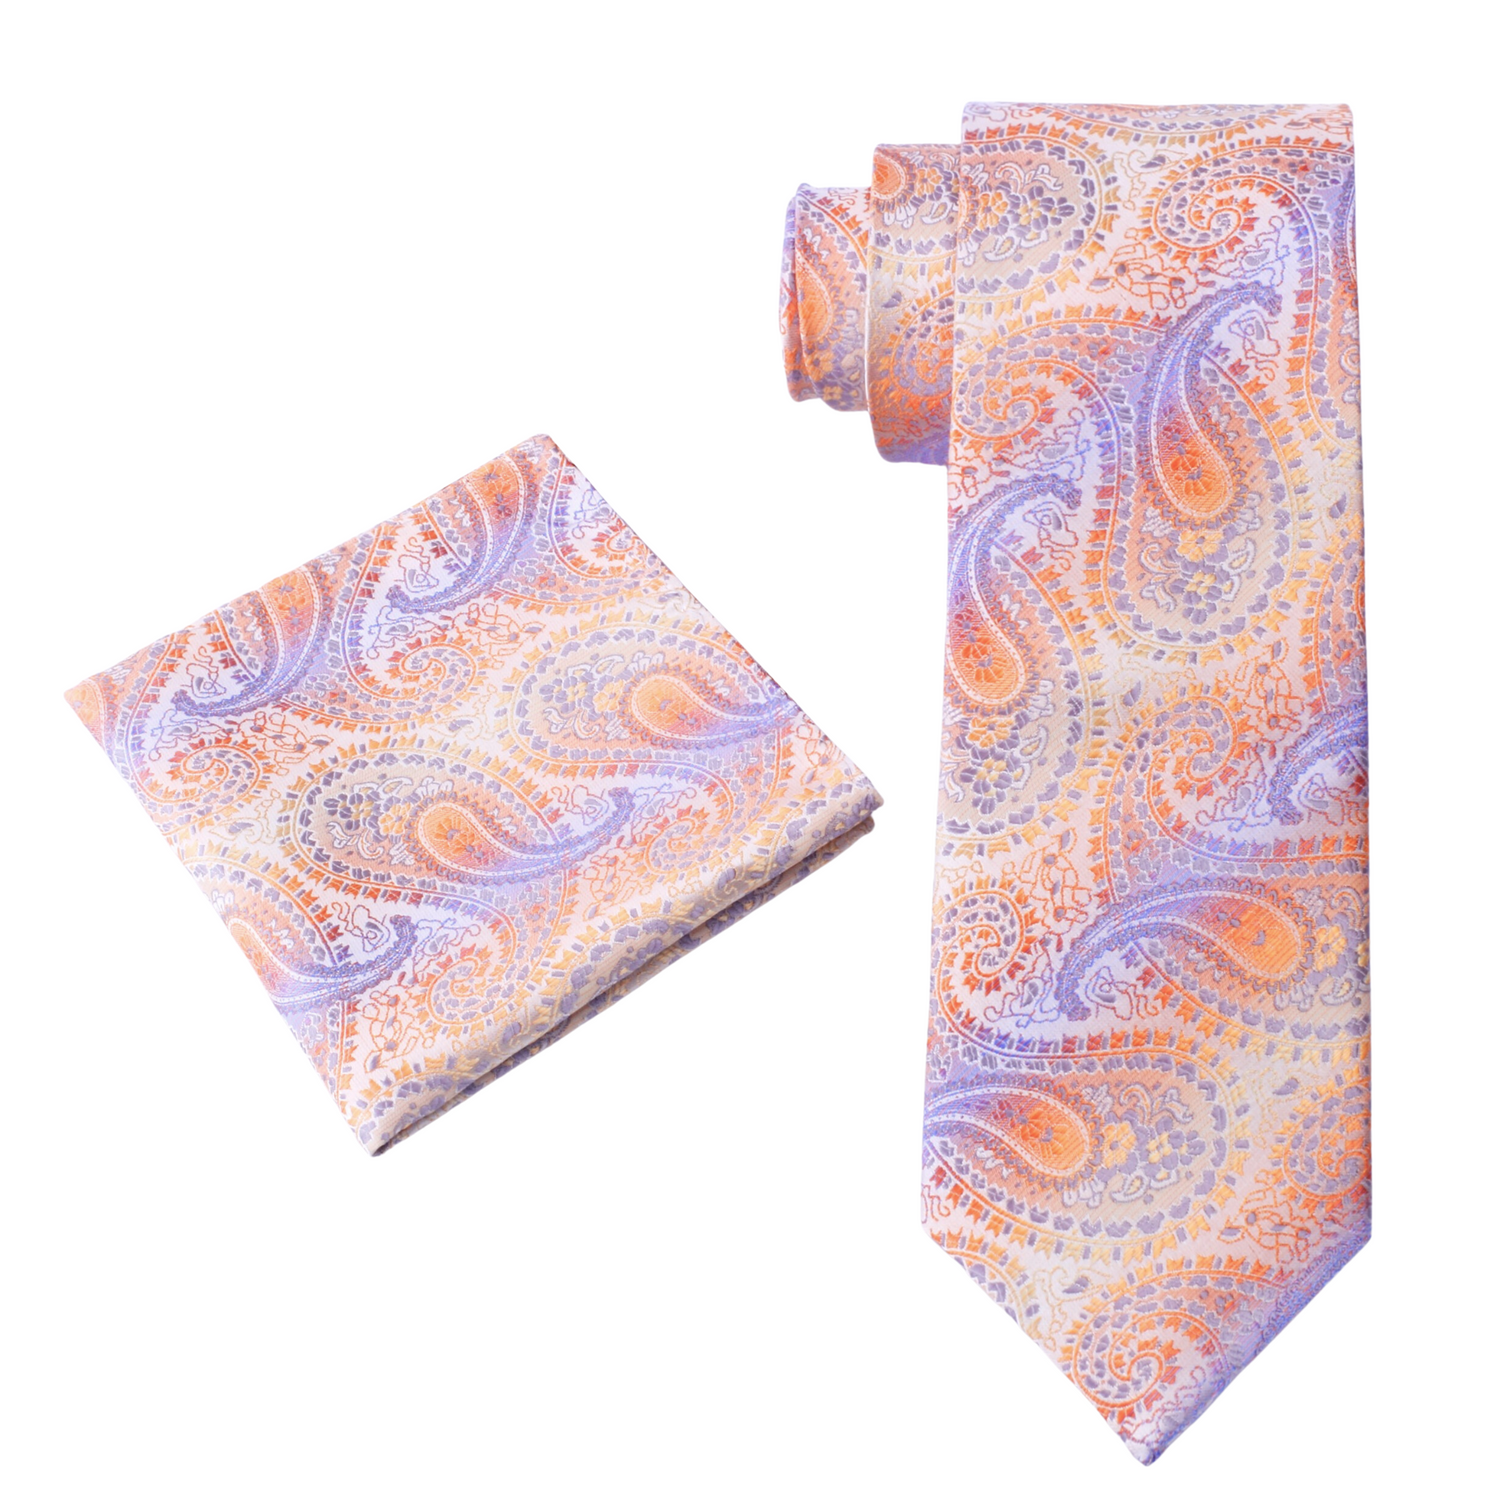 Alt View: Shades of Pastel Orange and Purple Paisley with Matching Square